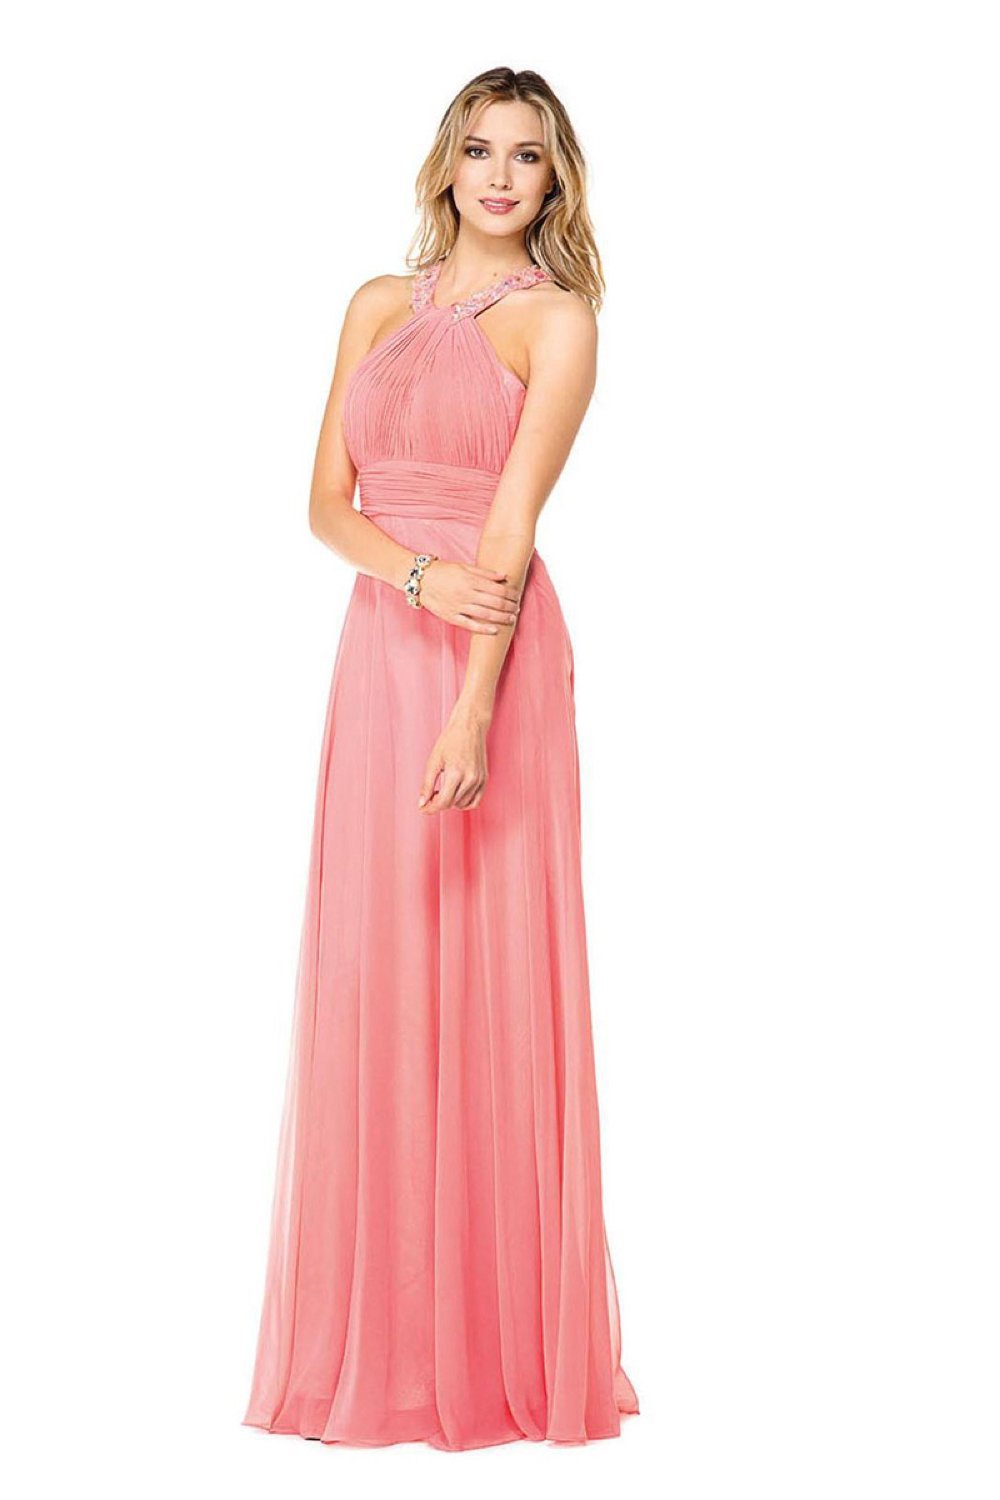 Glow by Colors - G183 Gem Beaded Halter Chiffon Evening Dress Special Occasion Dress 4 / Blush